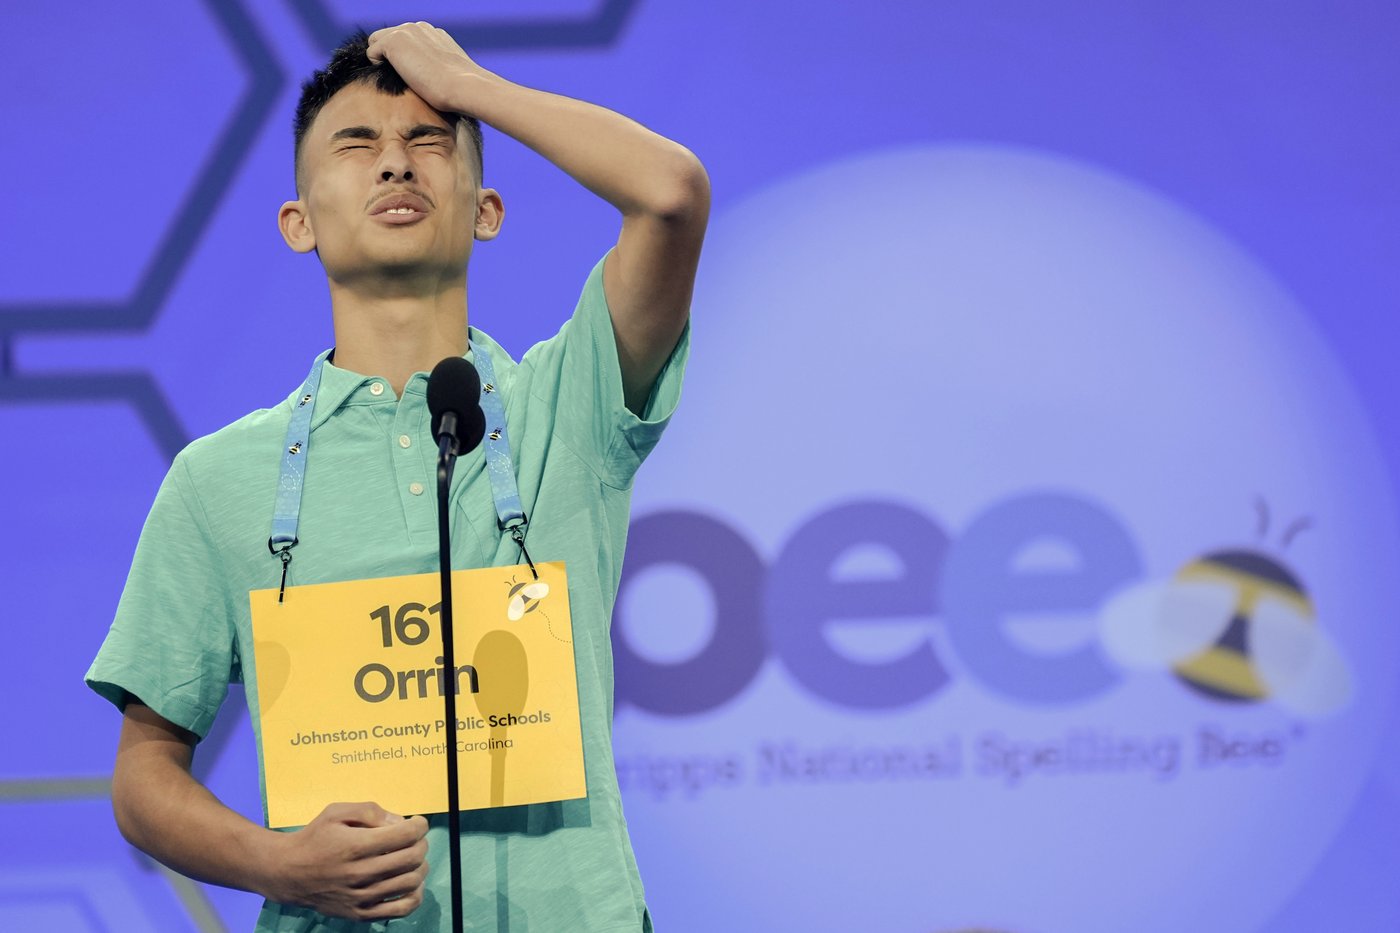 National Spelling Bee competitors try to address weaknesses, including